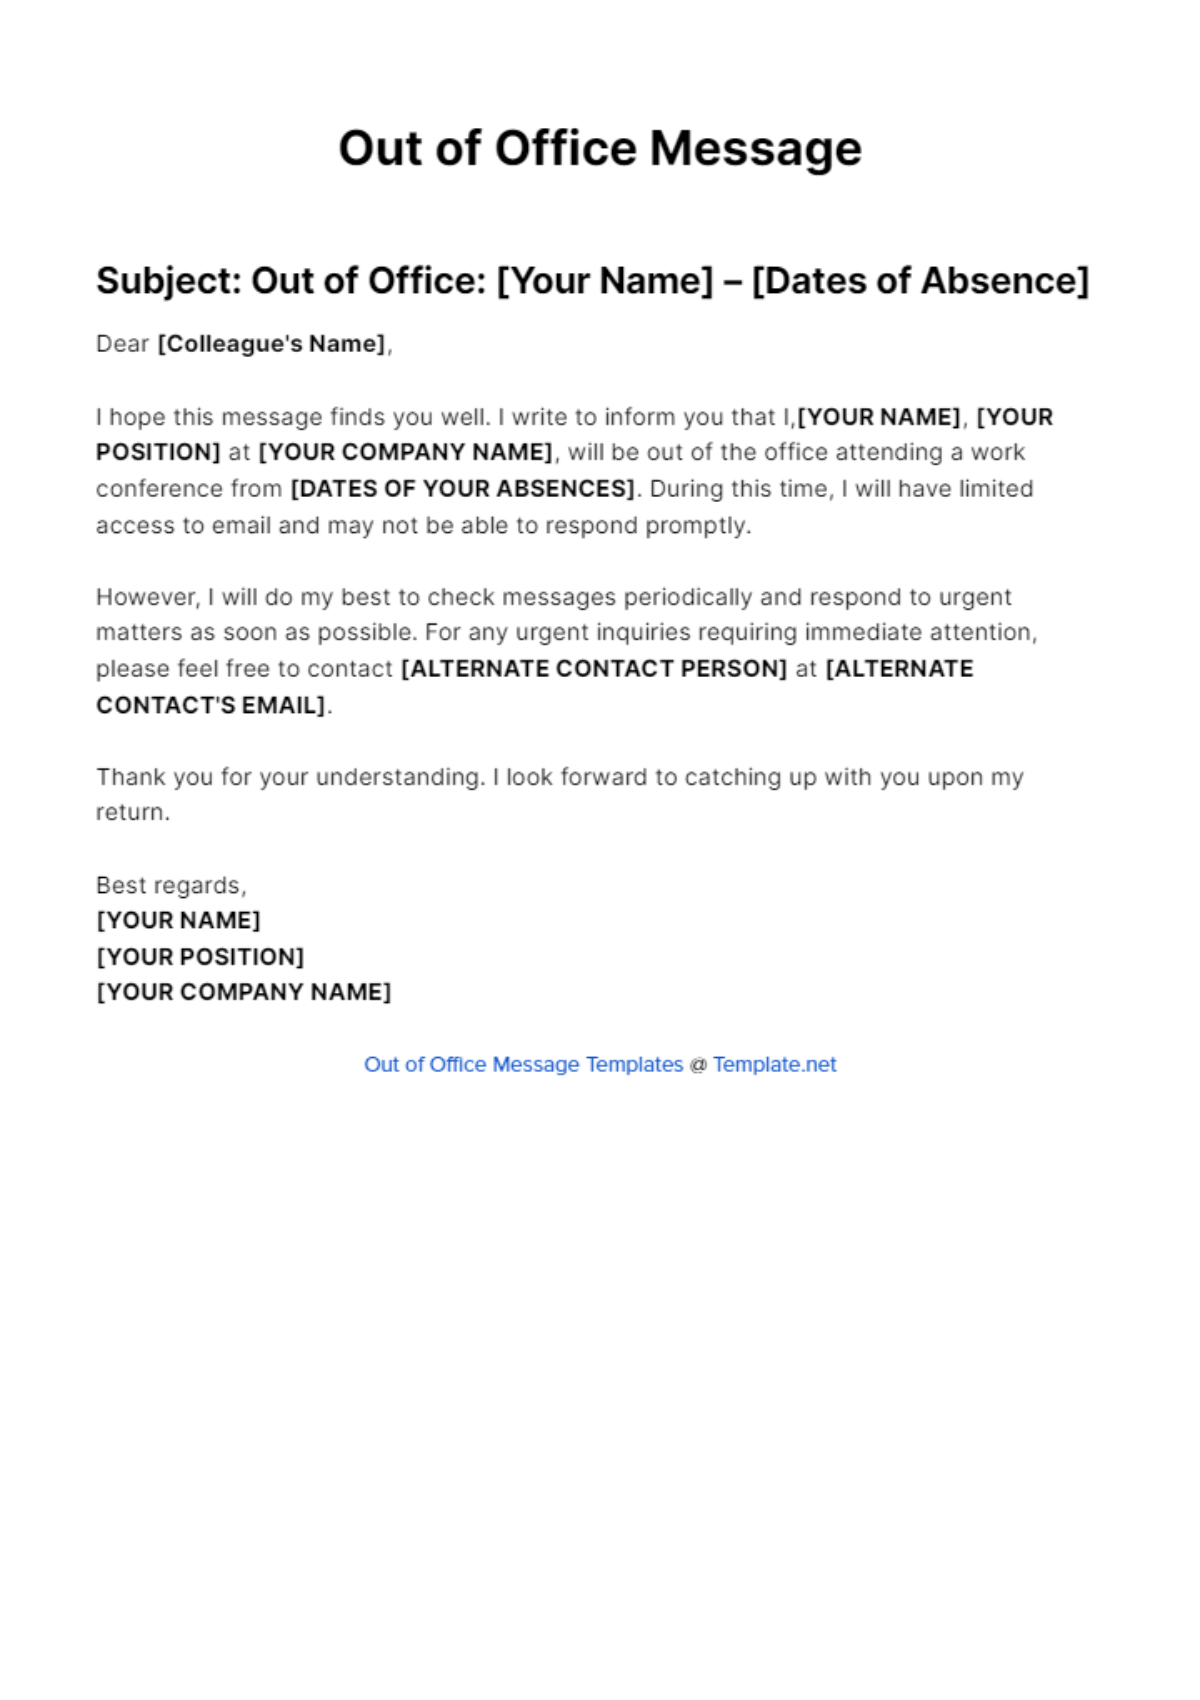 Free Work Conference Out Of Office Message Template